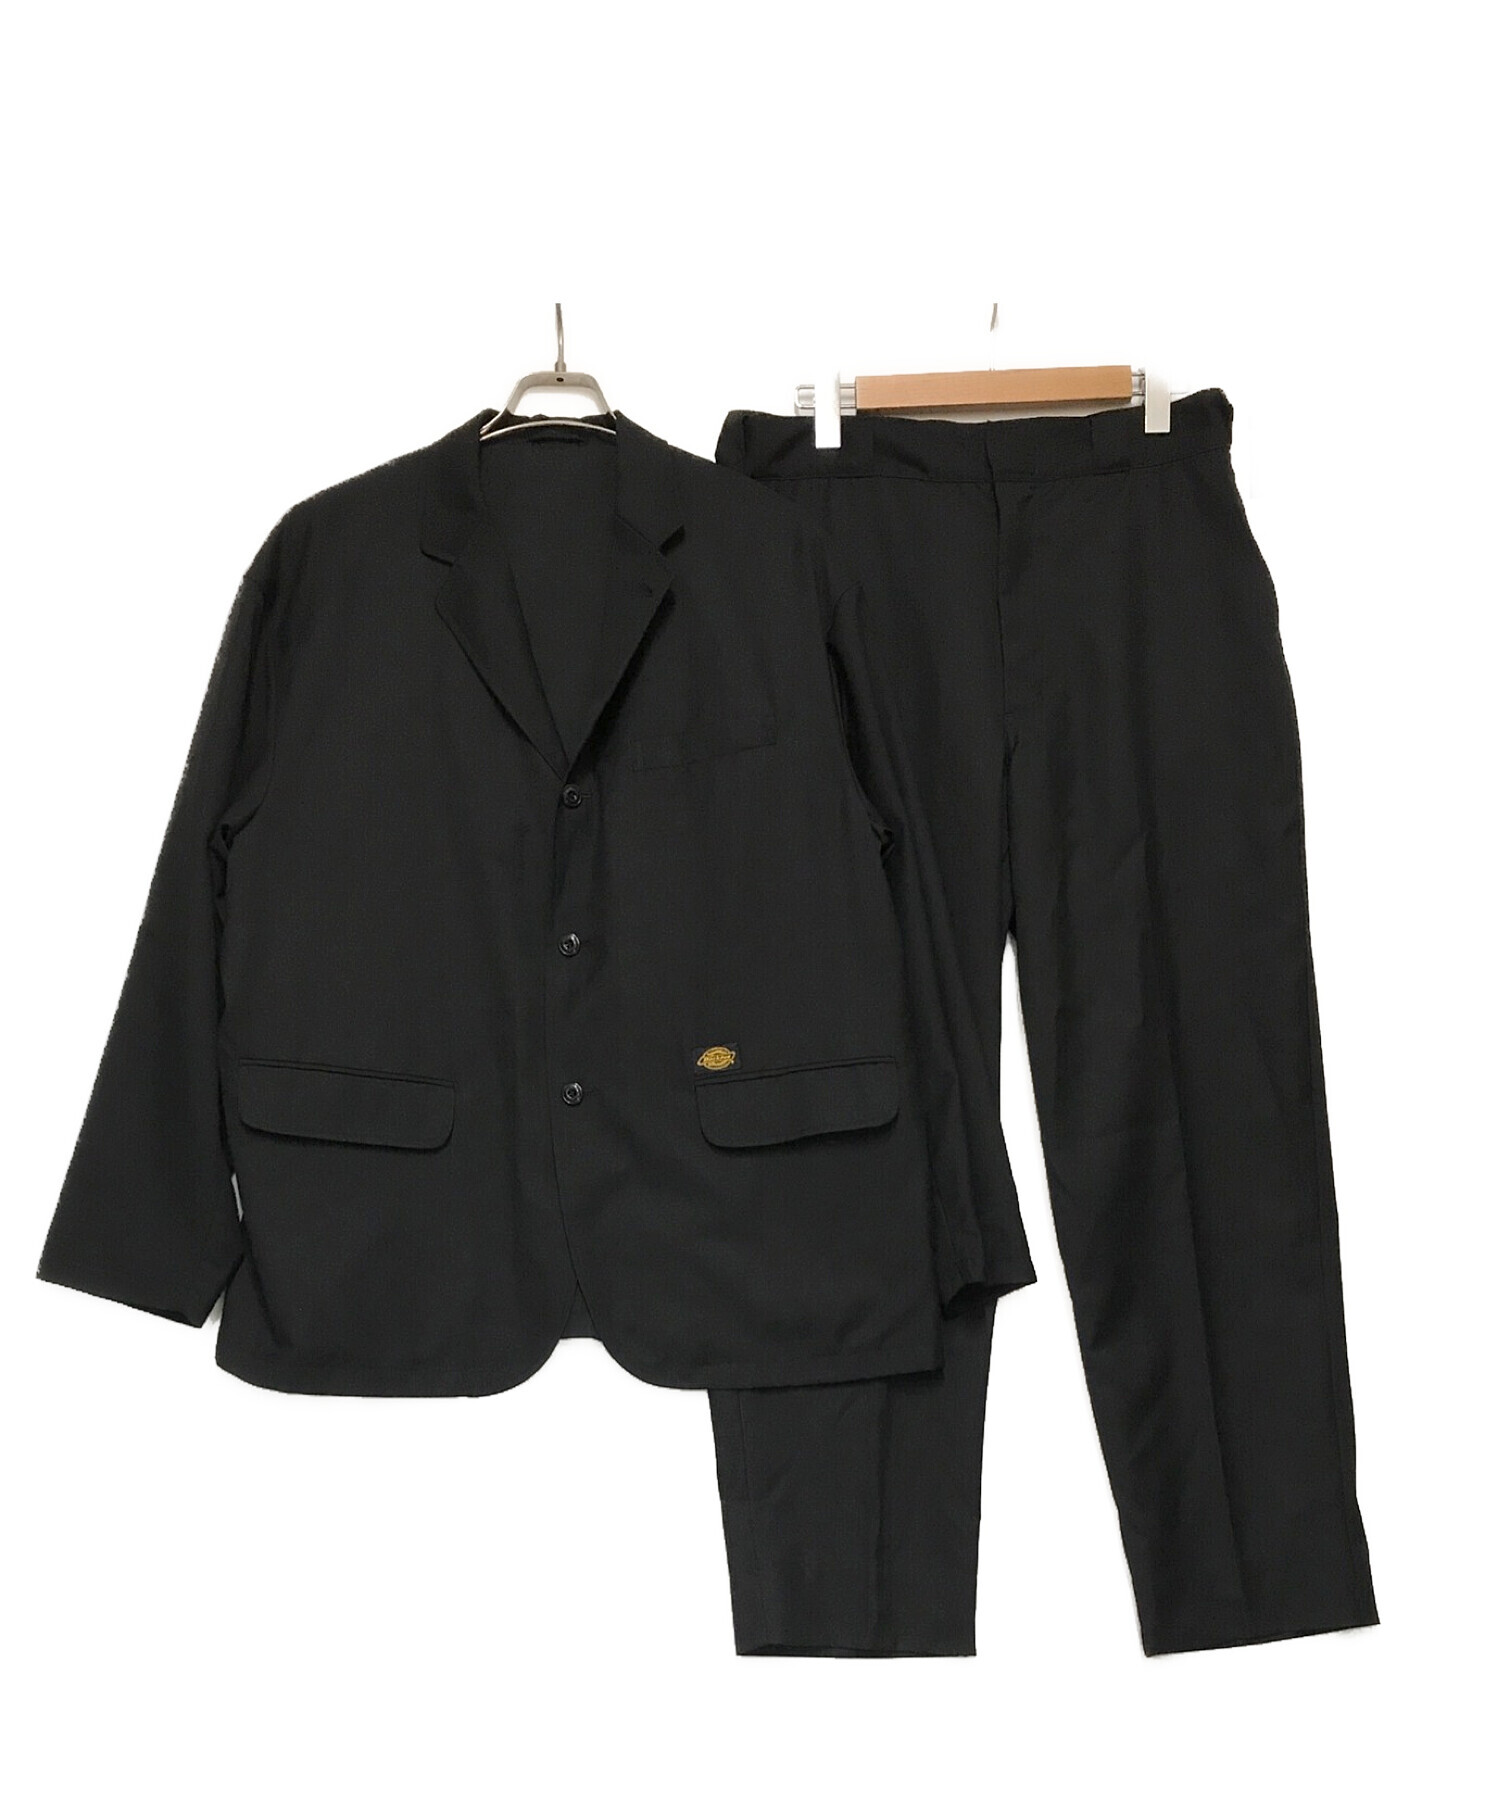 Dickies × TRIPSTER BLACK SUIT セットアップ 正規品 - セットアップ